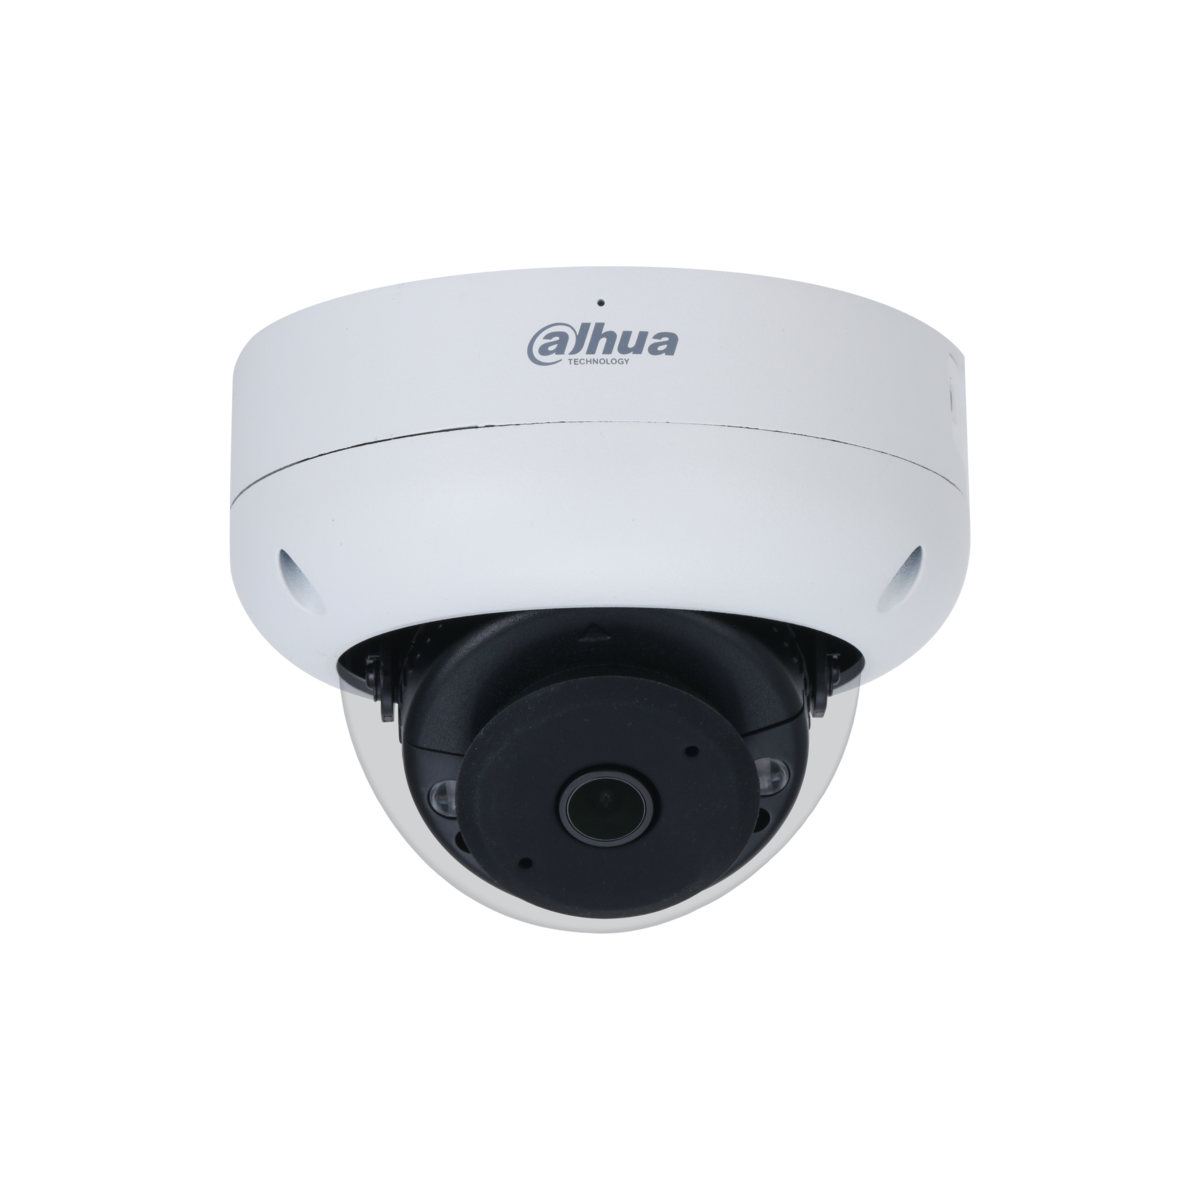 WIZSENSE SERIES IP CAMERA WHITE AI 180° PANORAMIC 4MP H.264/4+/5/5+ DOME 120 WDR METAL 2.1MMFIXED LENS STARLIGHT IR 15M POE IP67 BUILT IN MIC AUDIO IN AUDIO OUT 1 x ALARM IN 1 x ALARM OUT SUPPORT UP TO 256GB SD IK10 12VDC